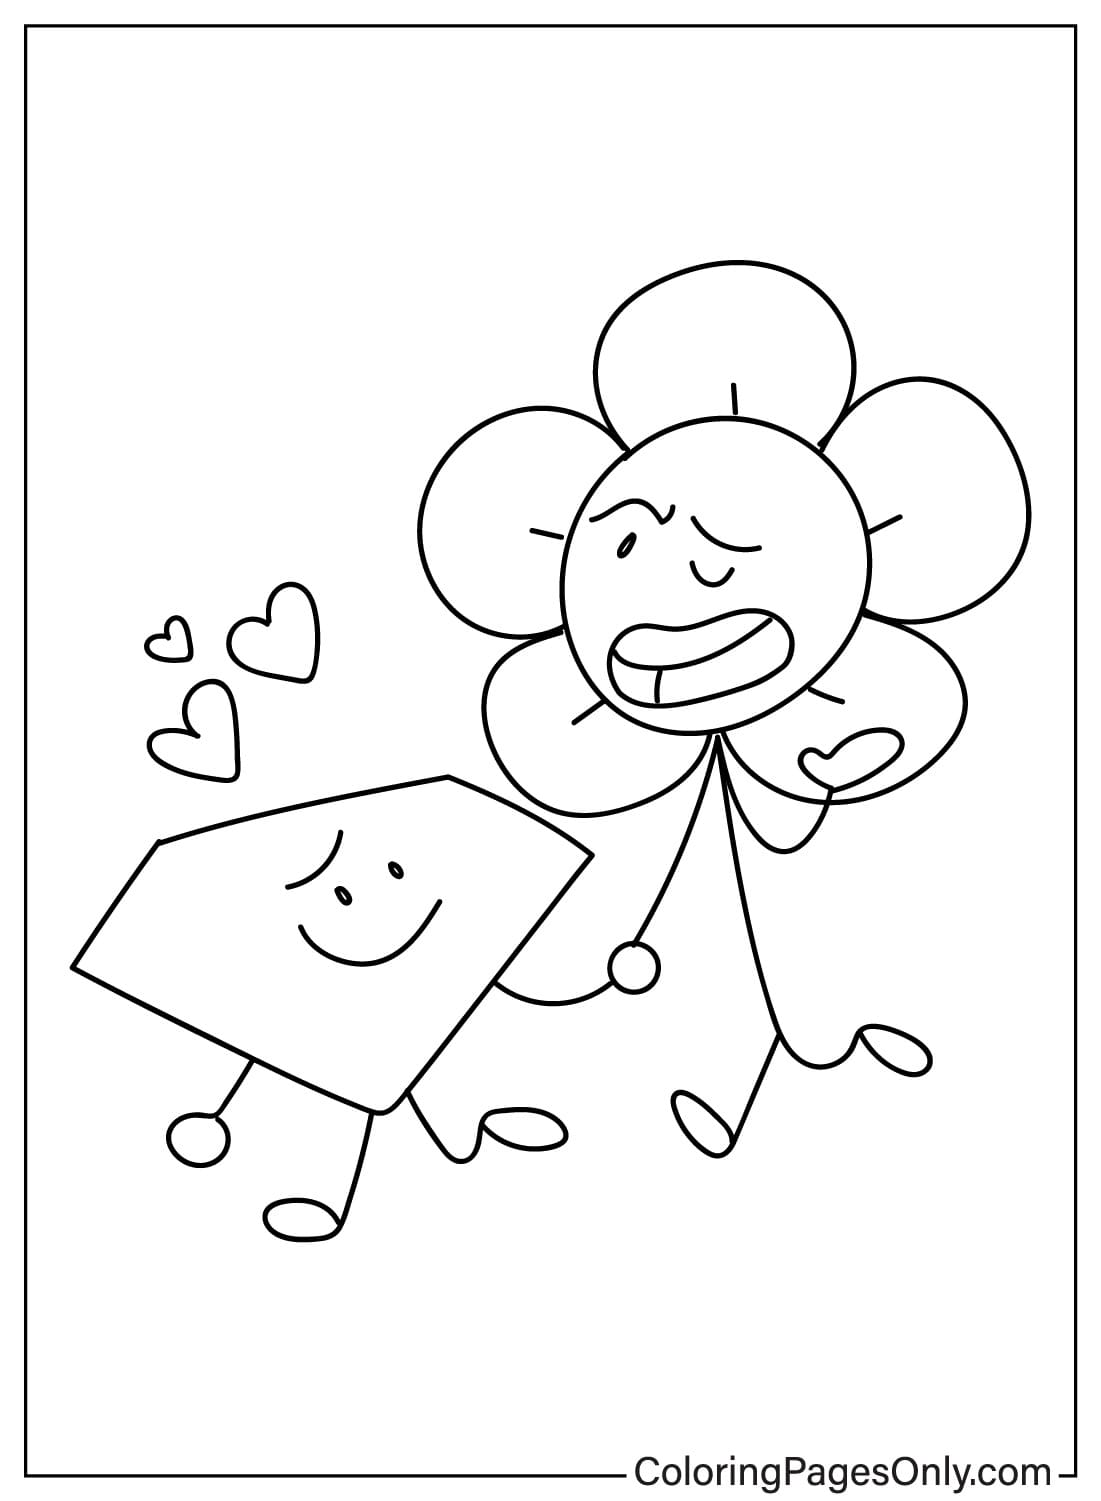 Dream Island Coloring Page Images ...